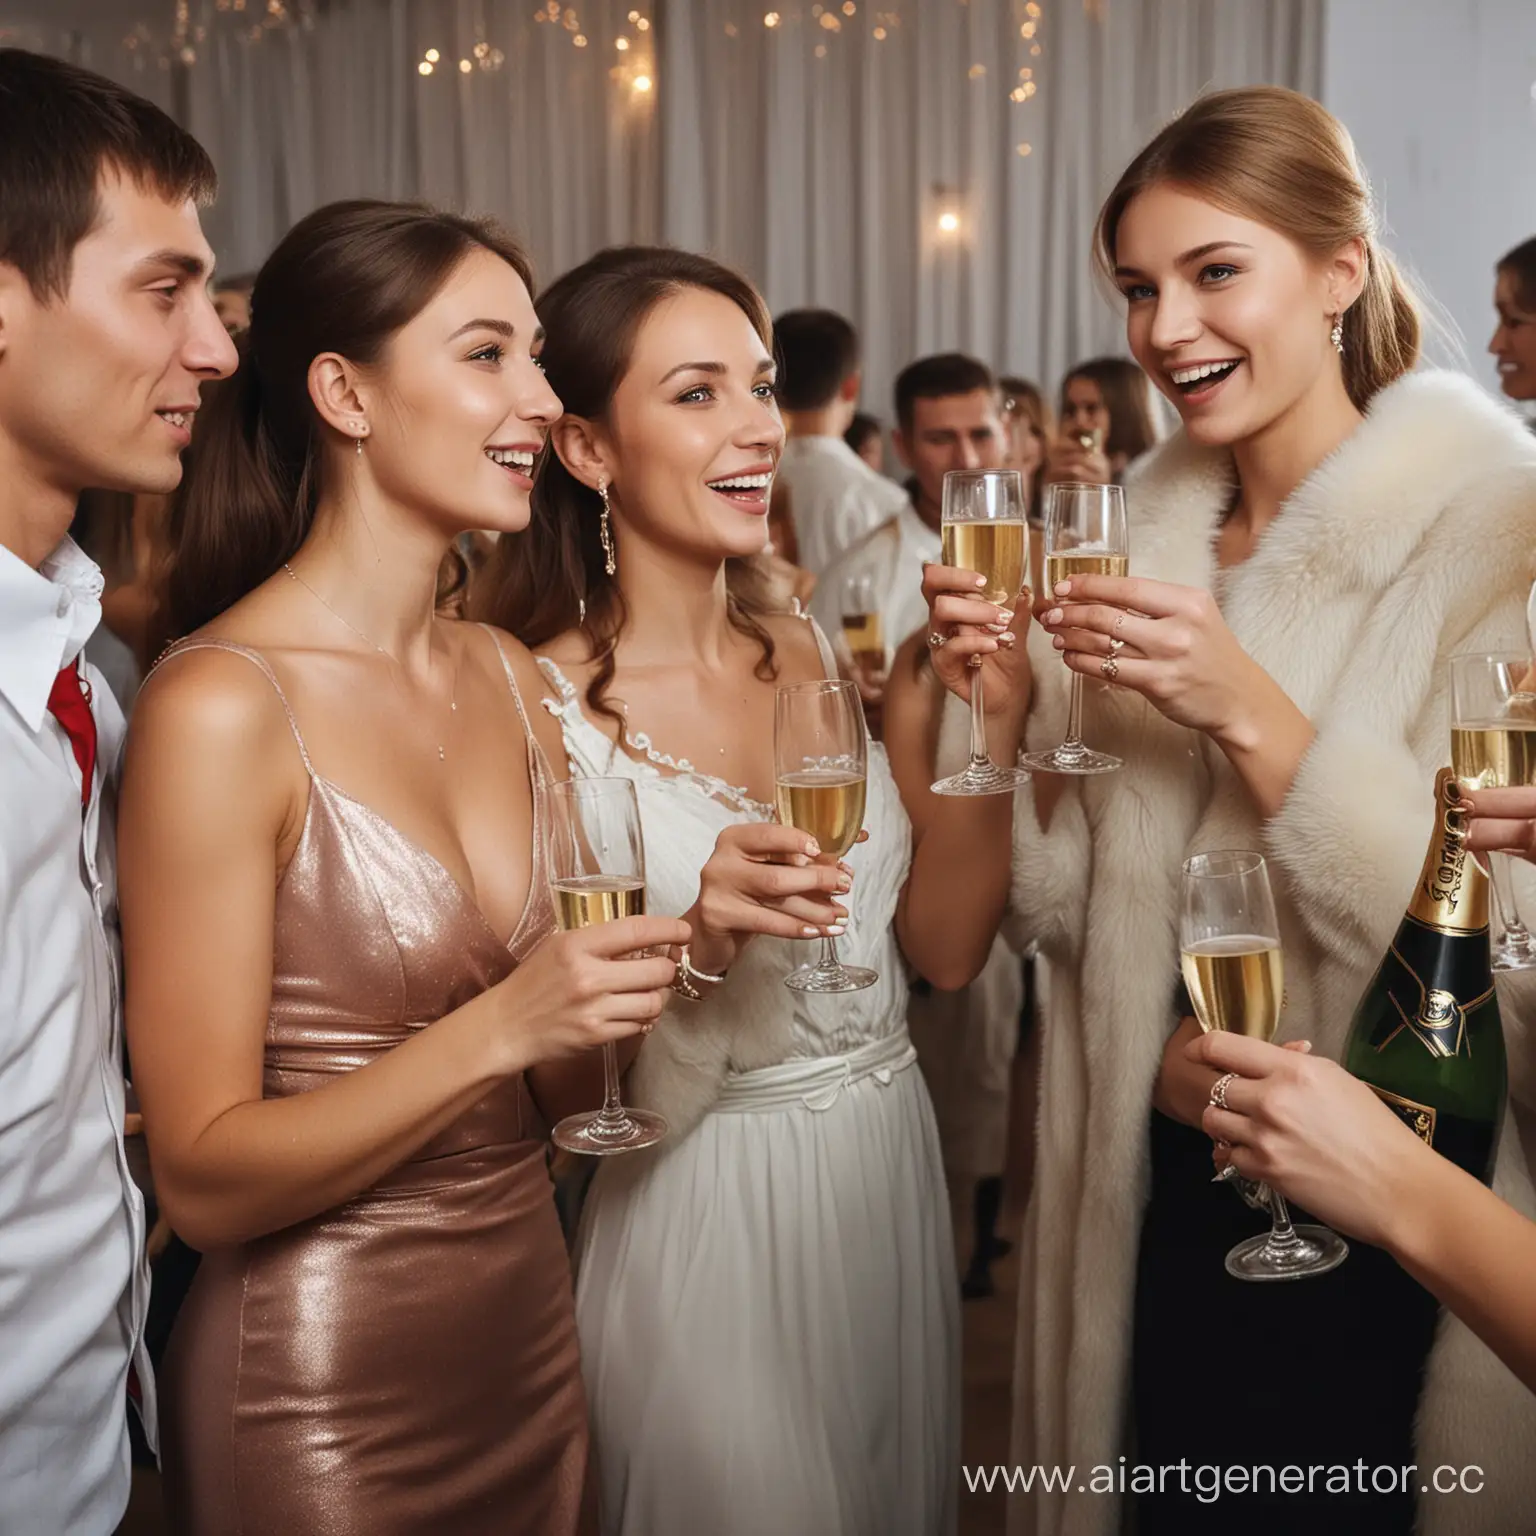 Russians drink champagne at a party